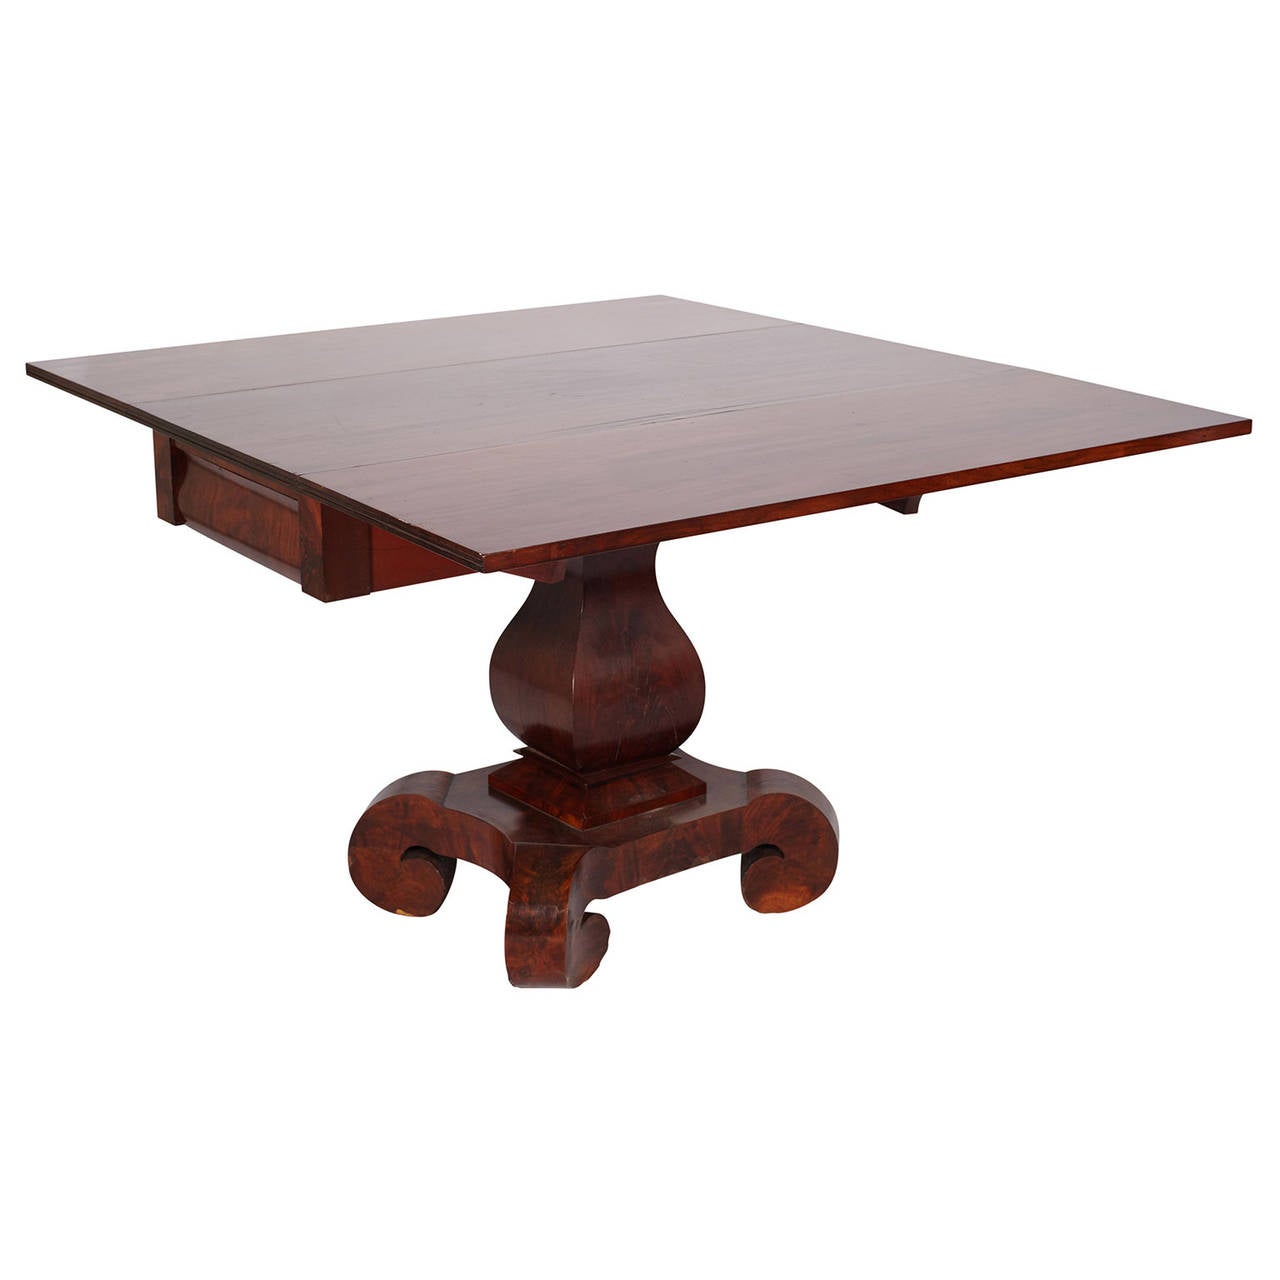 American Empire Mahogany Drop-Leaf Table. Early 19th Century. Rectangular top opens to 42